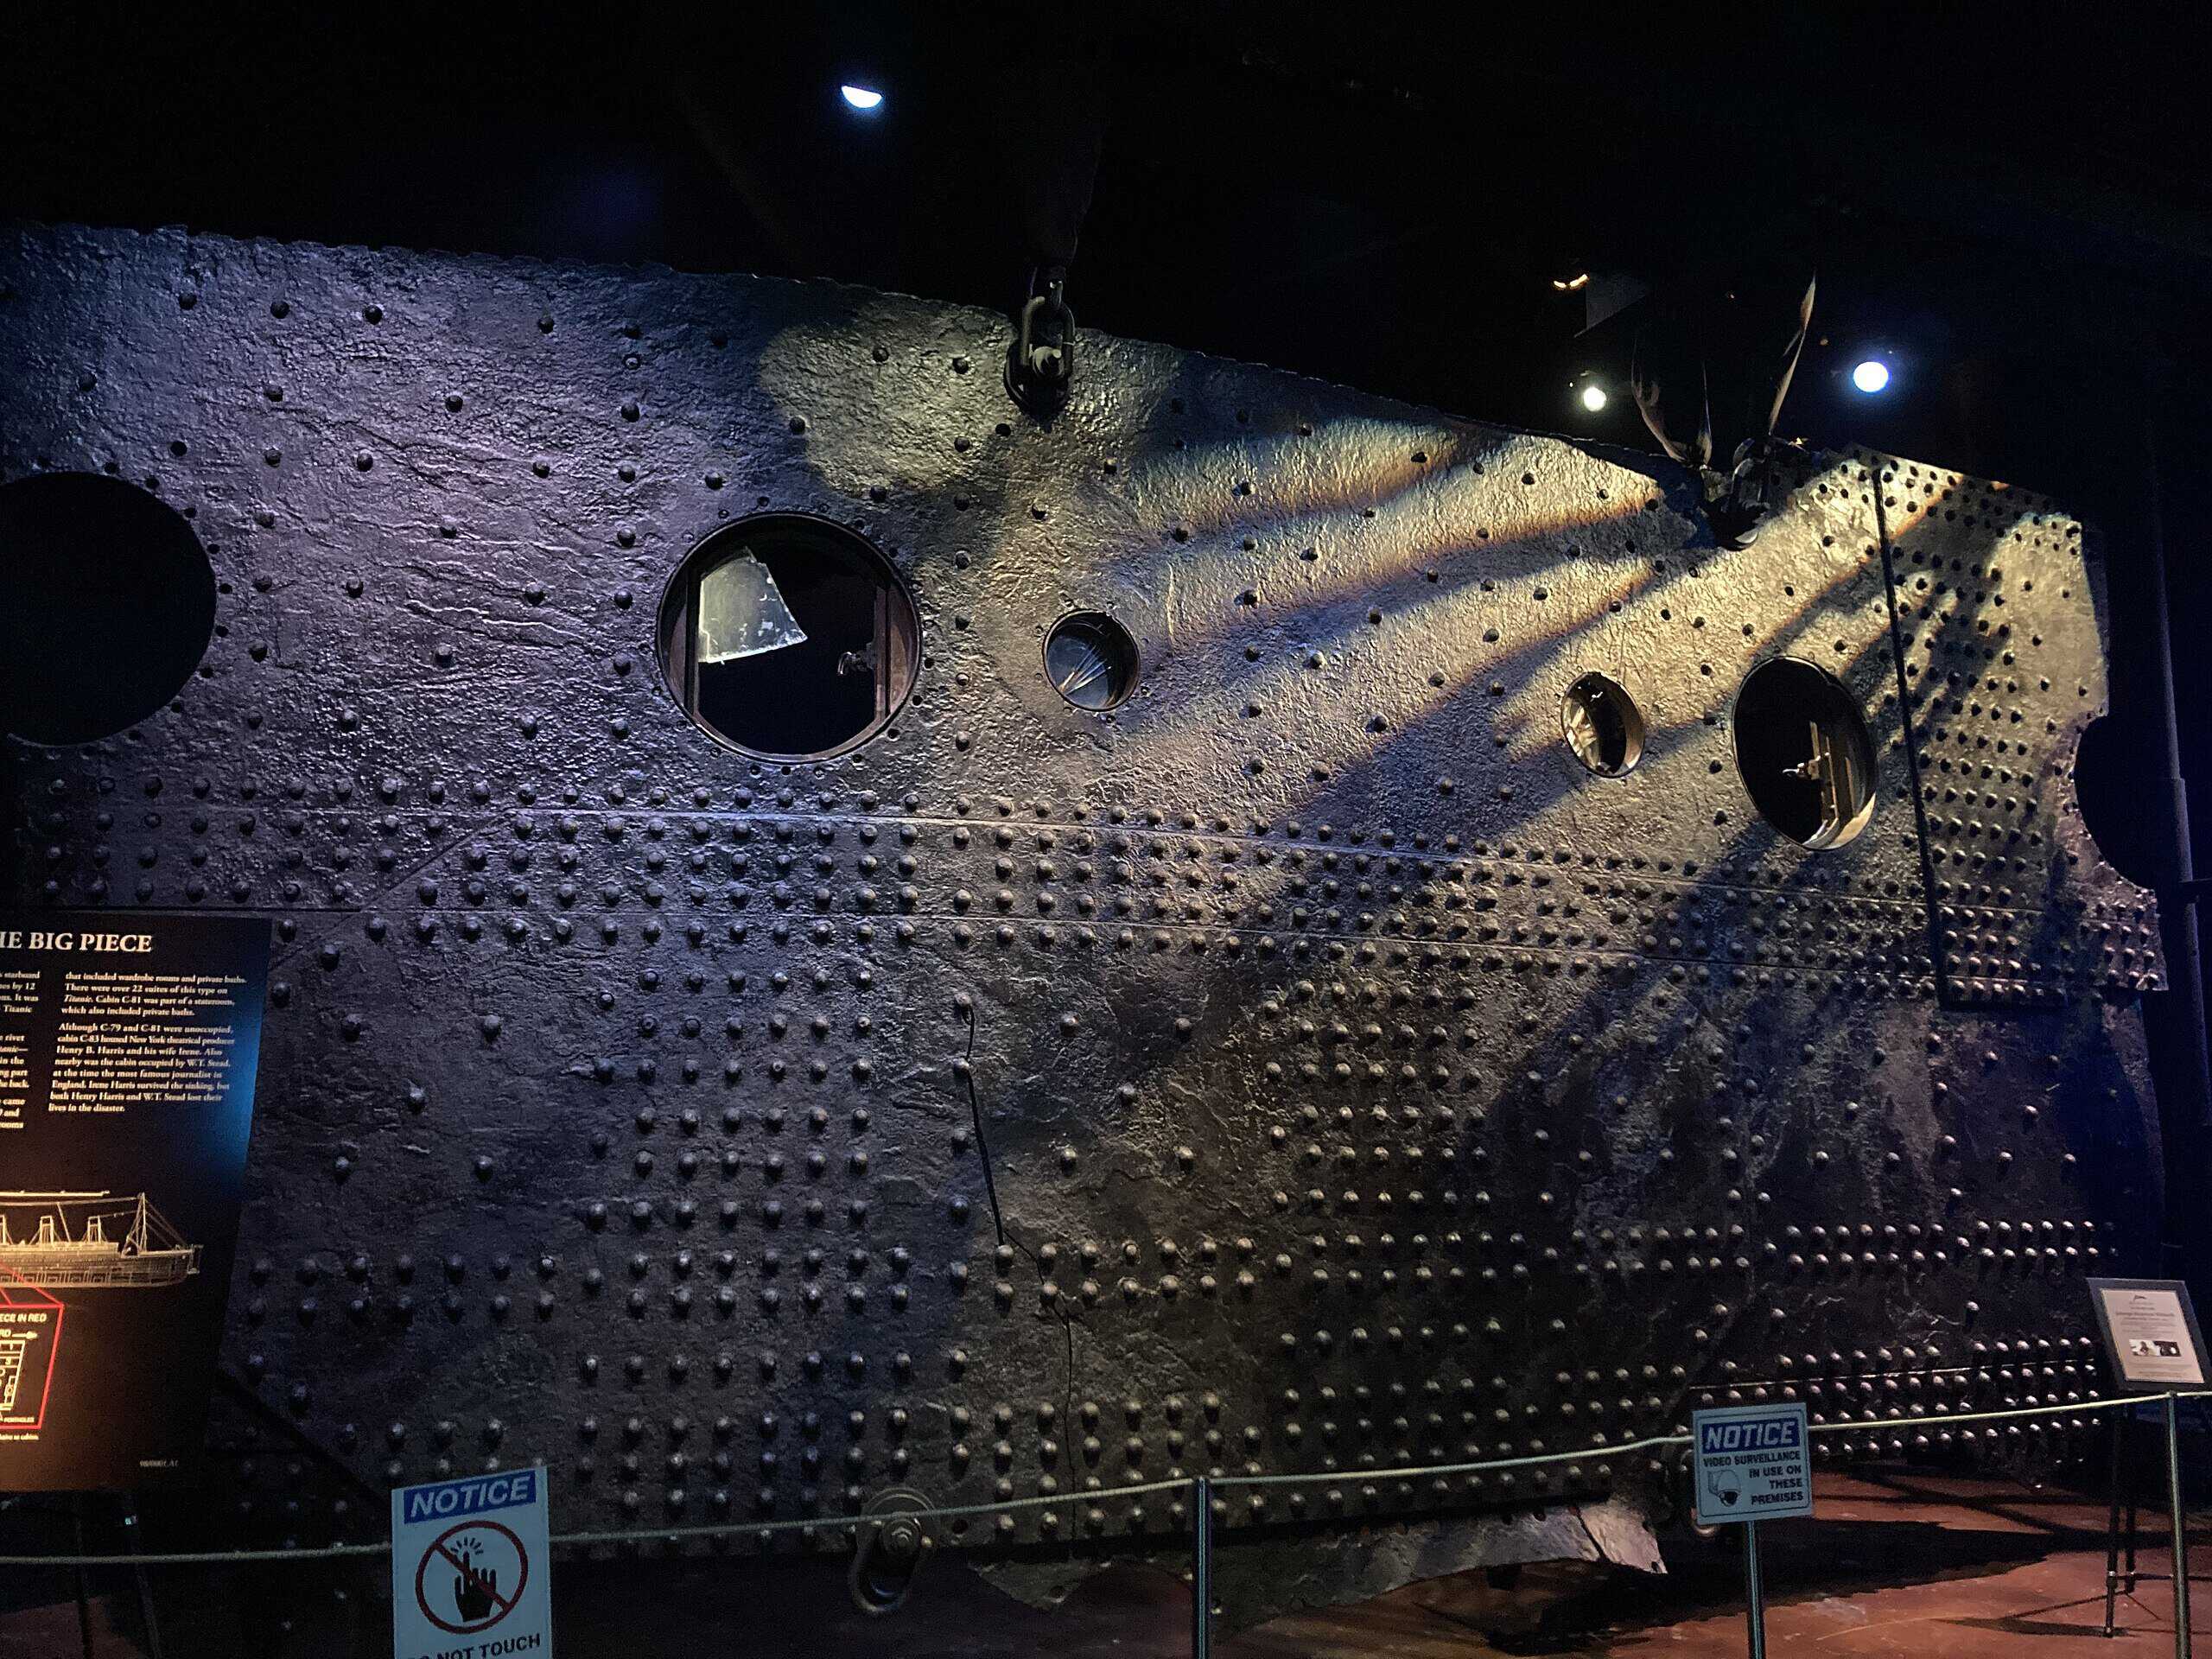 <p>One of the most incredible recoveries from the Titanic wreck has been a piece of its hull. The largest physical piece recovered to date, this image shows the hull piece on display. Touring different museums, some have even allowed museum-goers to touch the hull for a brief moment. </p><p><span>Would you please let us know what you think about our content? <p>Agree? Tell us by clicking the “Thumbs Up” button above.</p> Disagree? Leave a comment telling us what you’d change.</span></p>